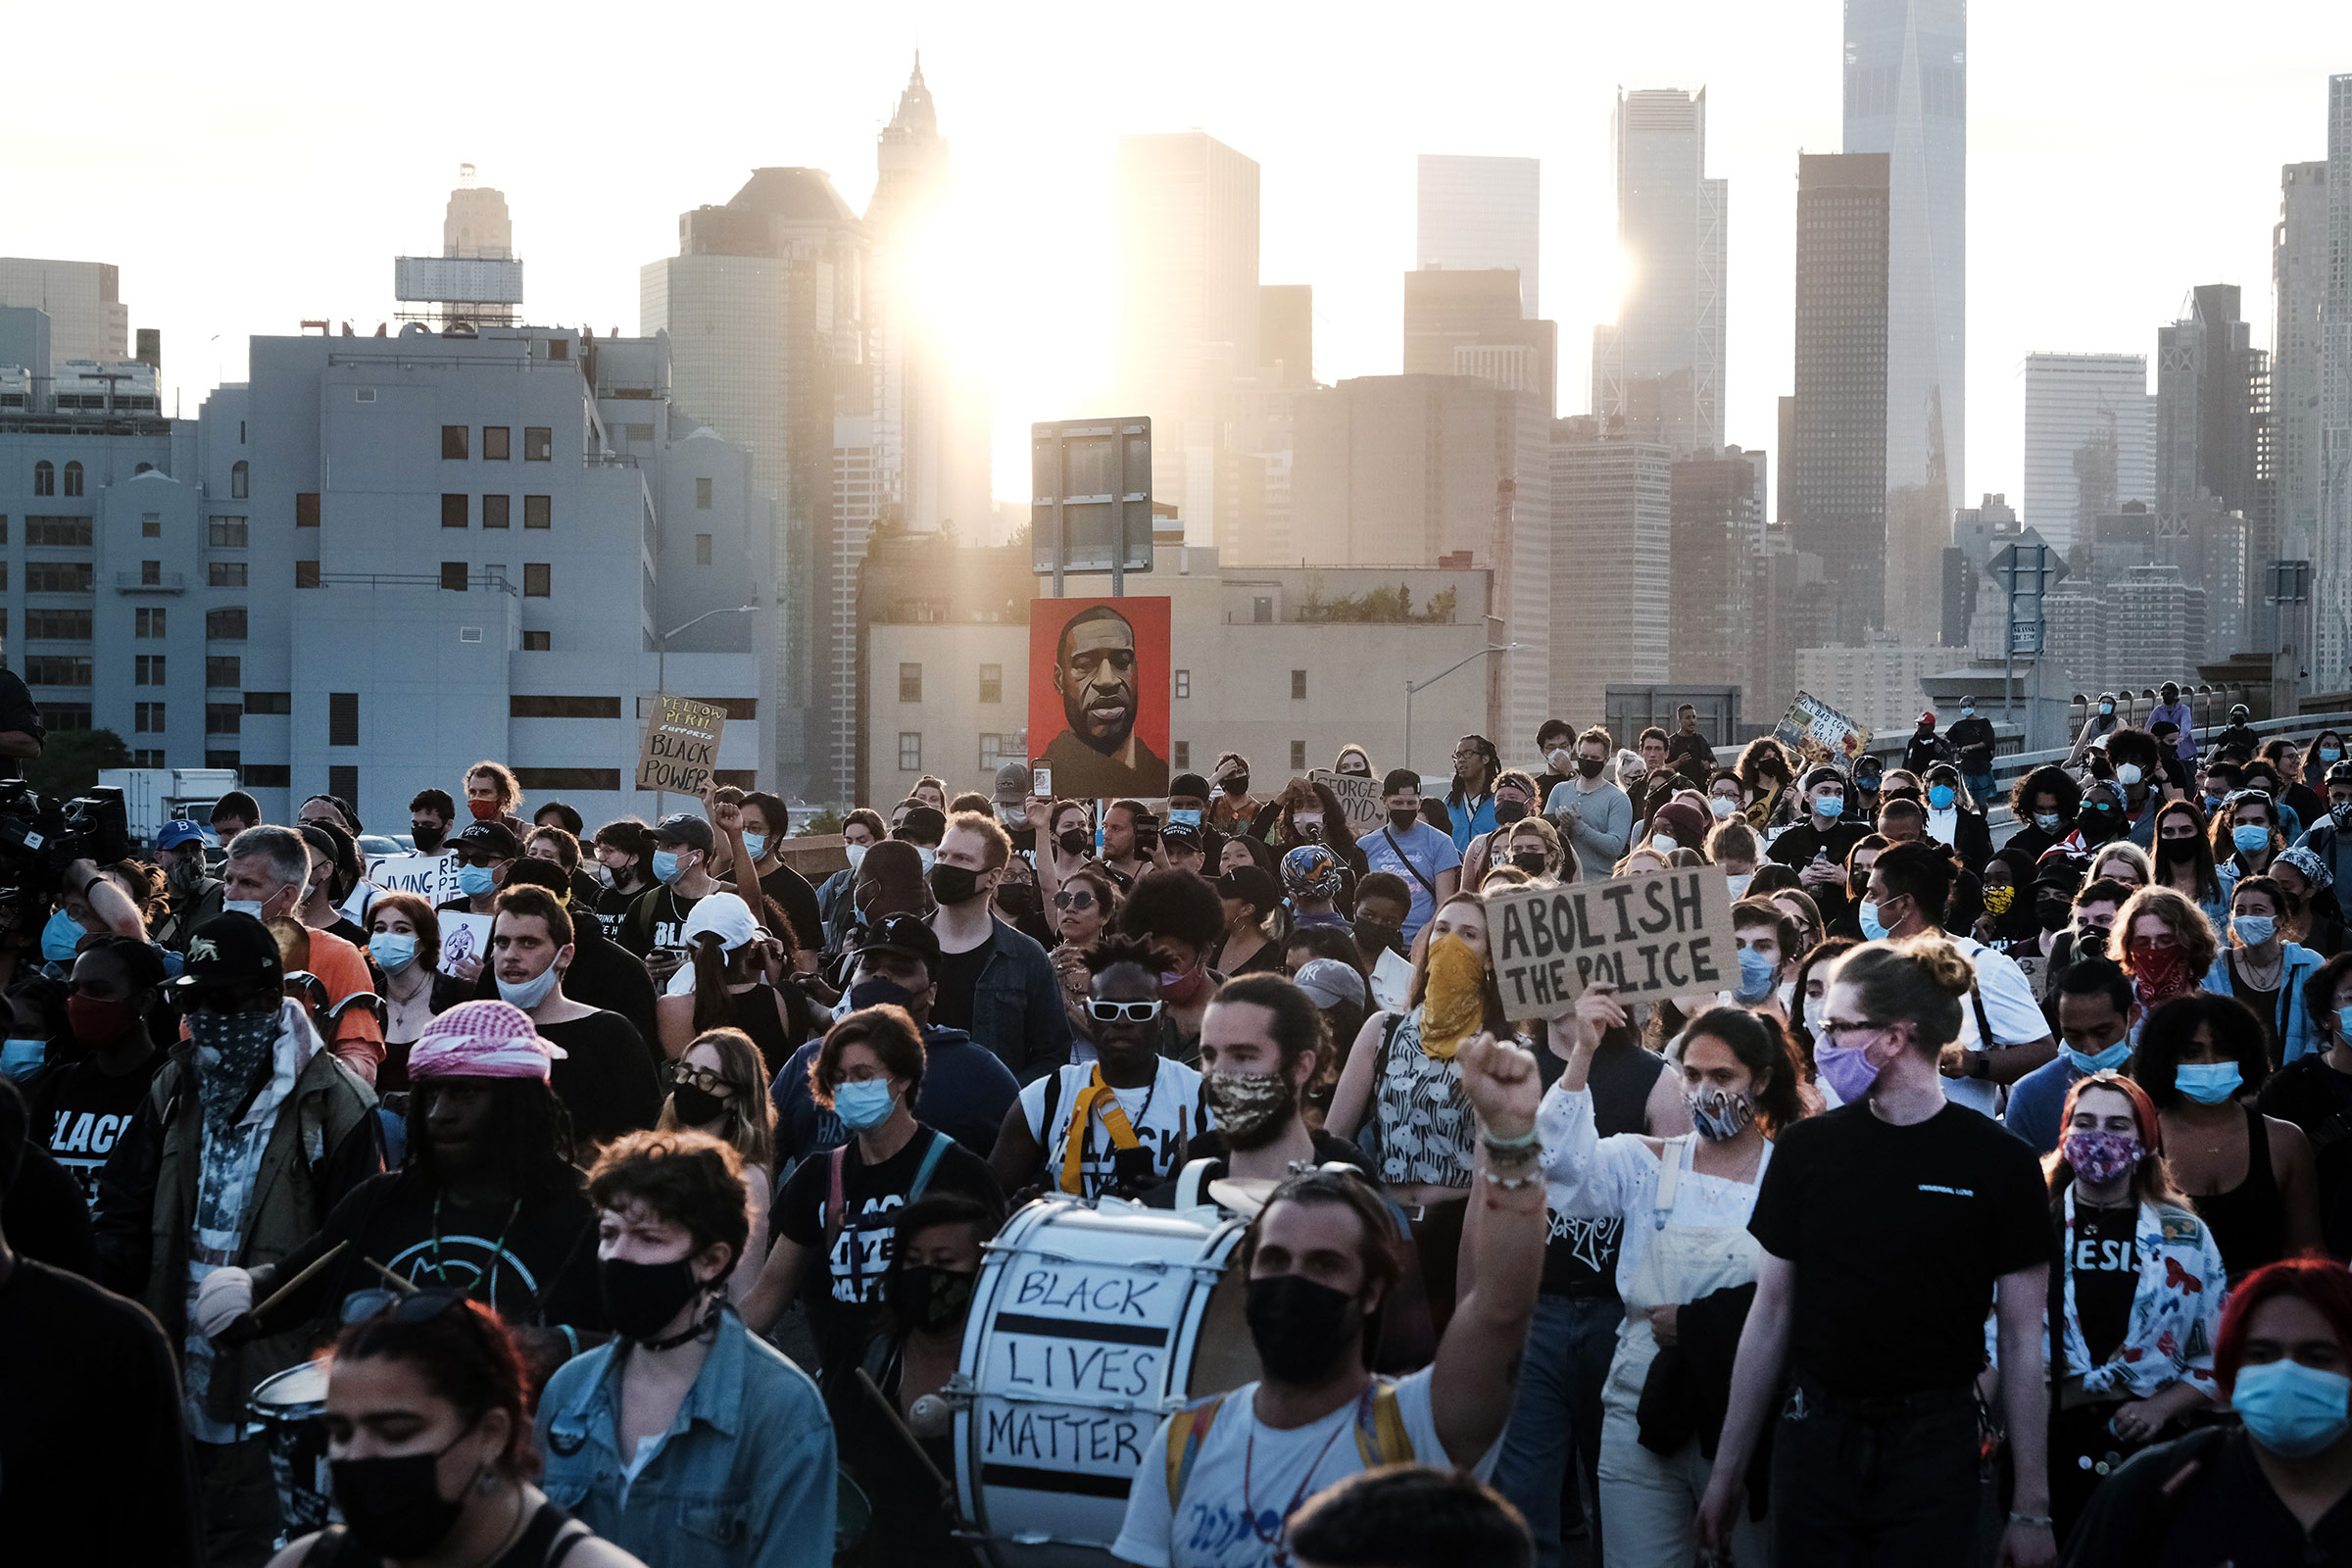 Black Lives Matter supporters and others march across the Brooklyn Bridge to honor George Floyd on the one year anniversary of his death on May 25, 2021. (Spencer Platt—Getty Images)